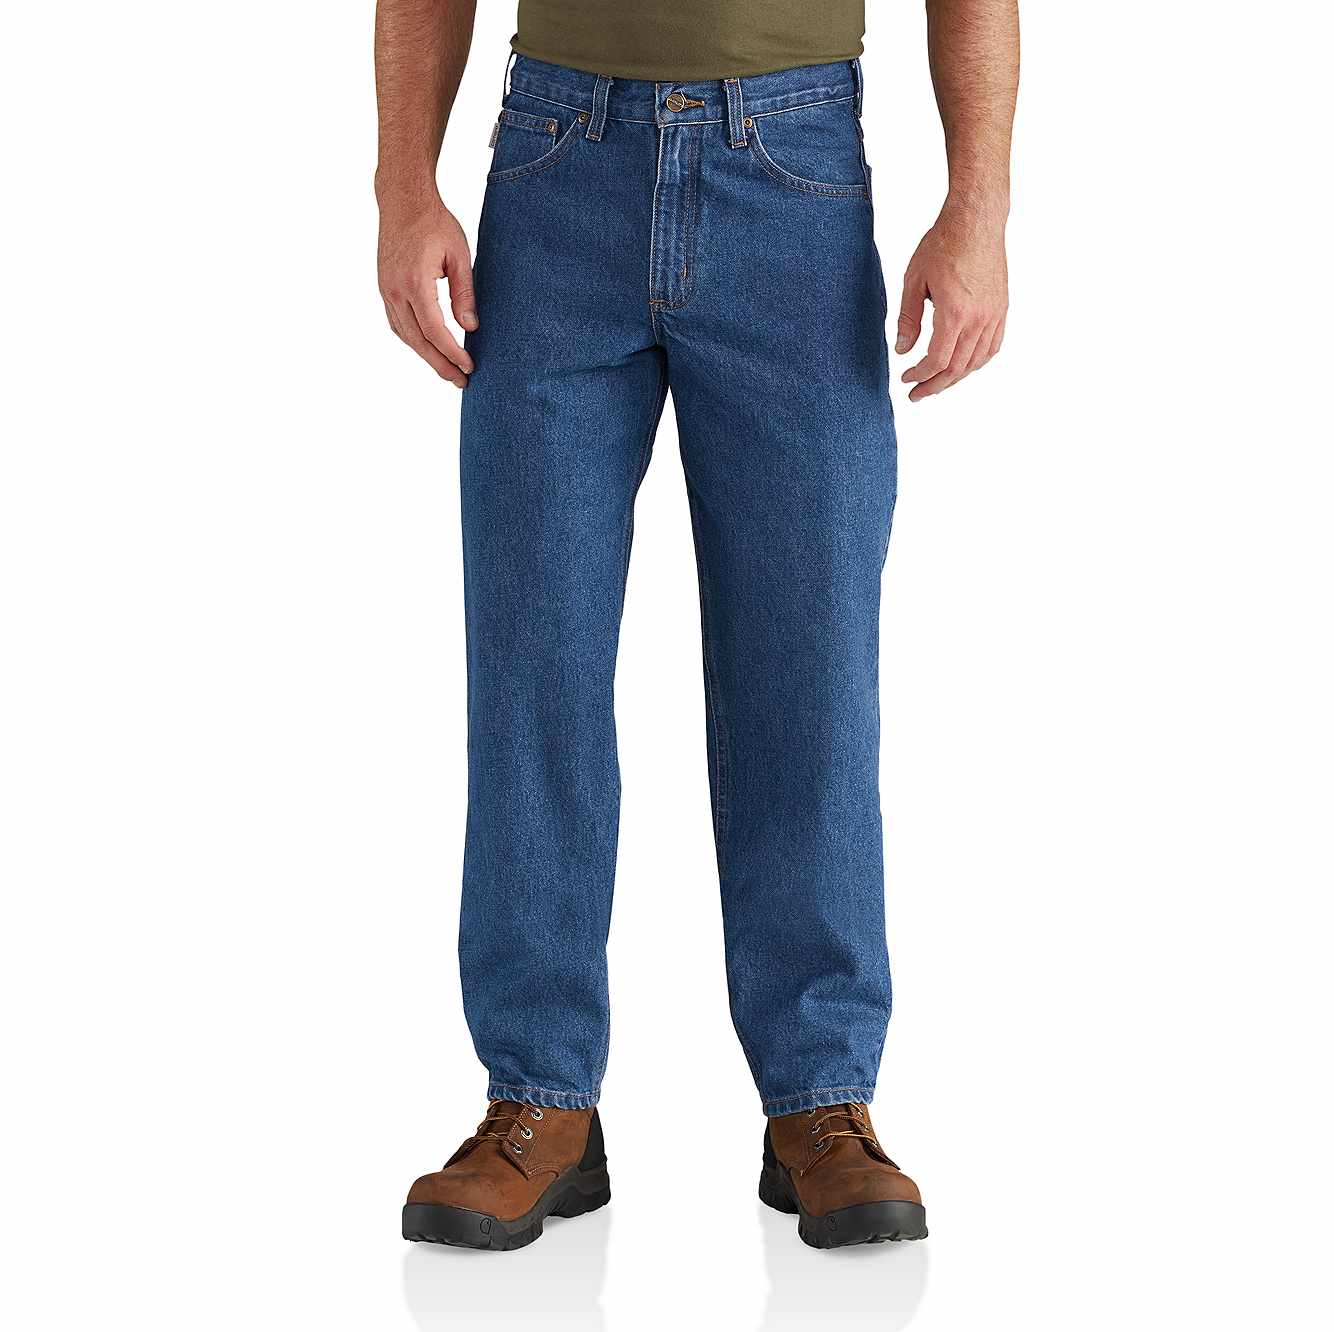 Levi's Men's 550 Relaxed Fit Jeans Big & Tall Sizes | eBay